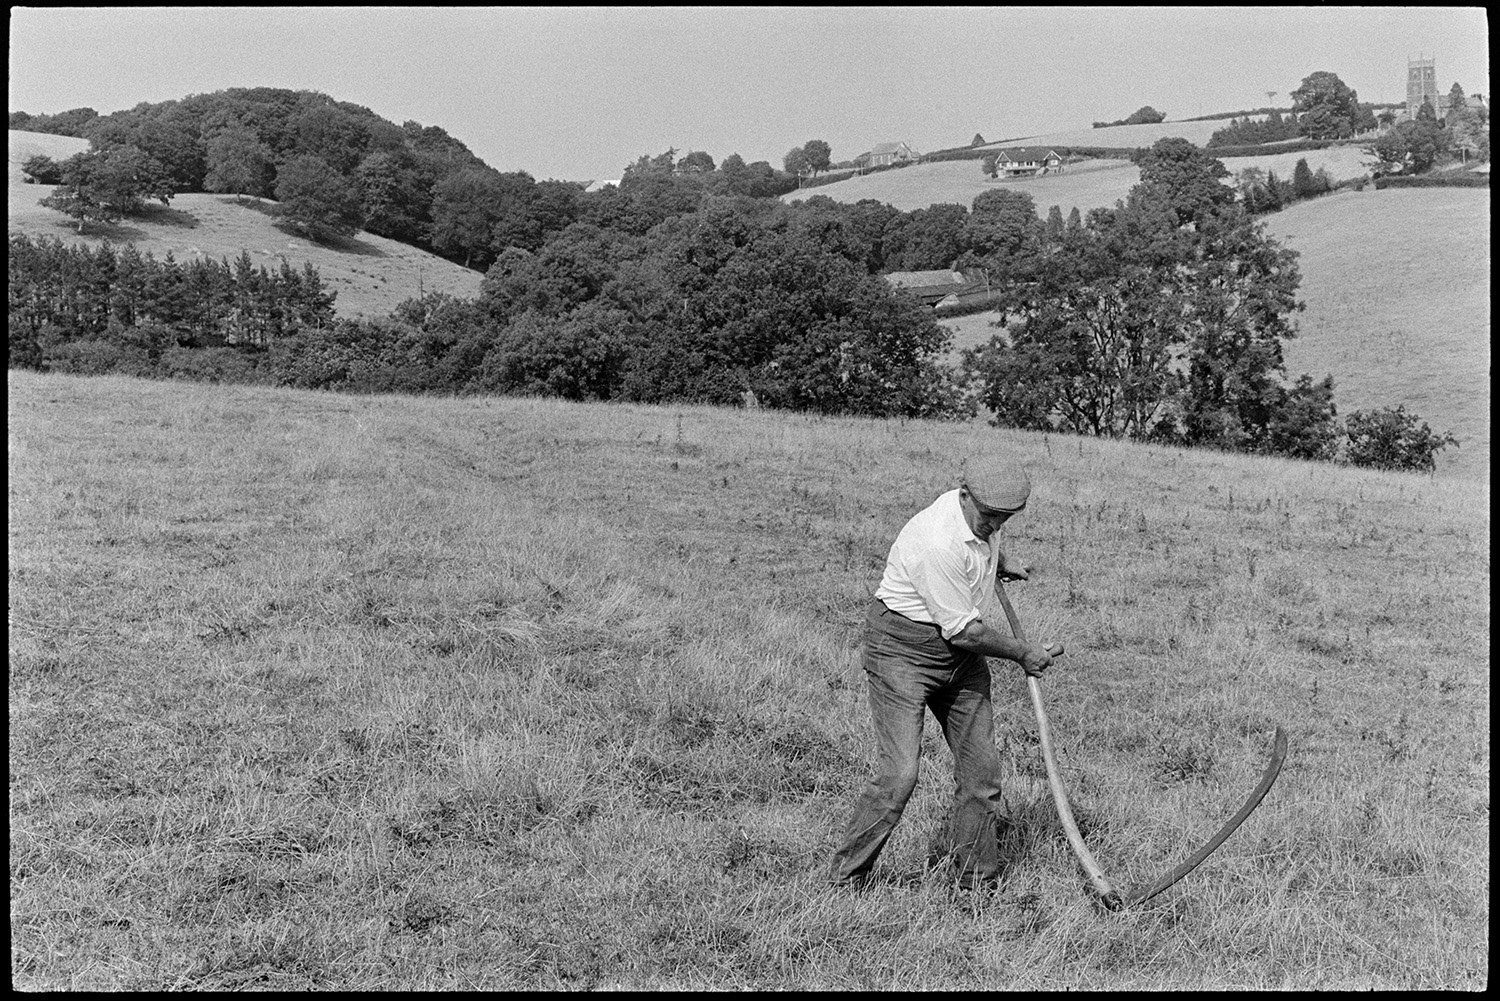 Farmer scything thistles in field during drought. 
[A man using a scythe to cut thistles in a field at Westpark, Iddesleigh during a drought. Woods, farm buildings and a church tower can be seen in the background.]